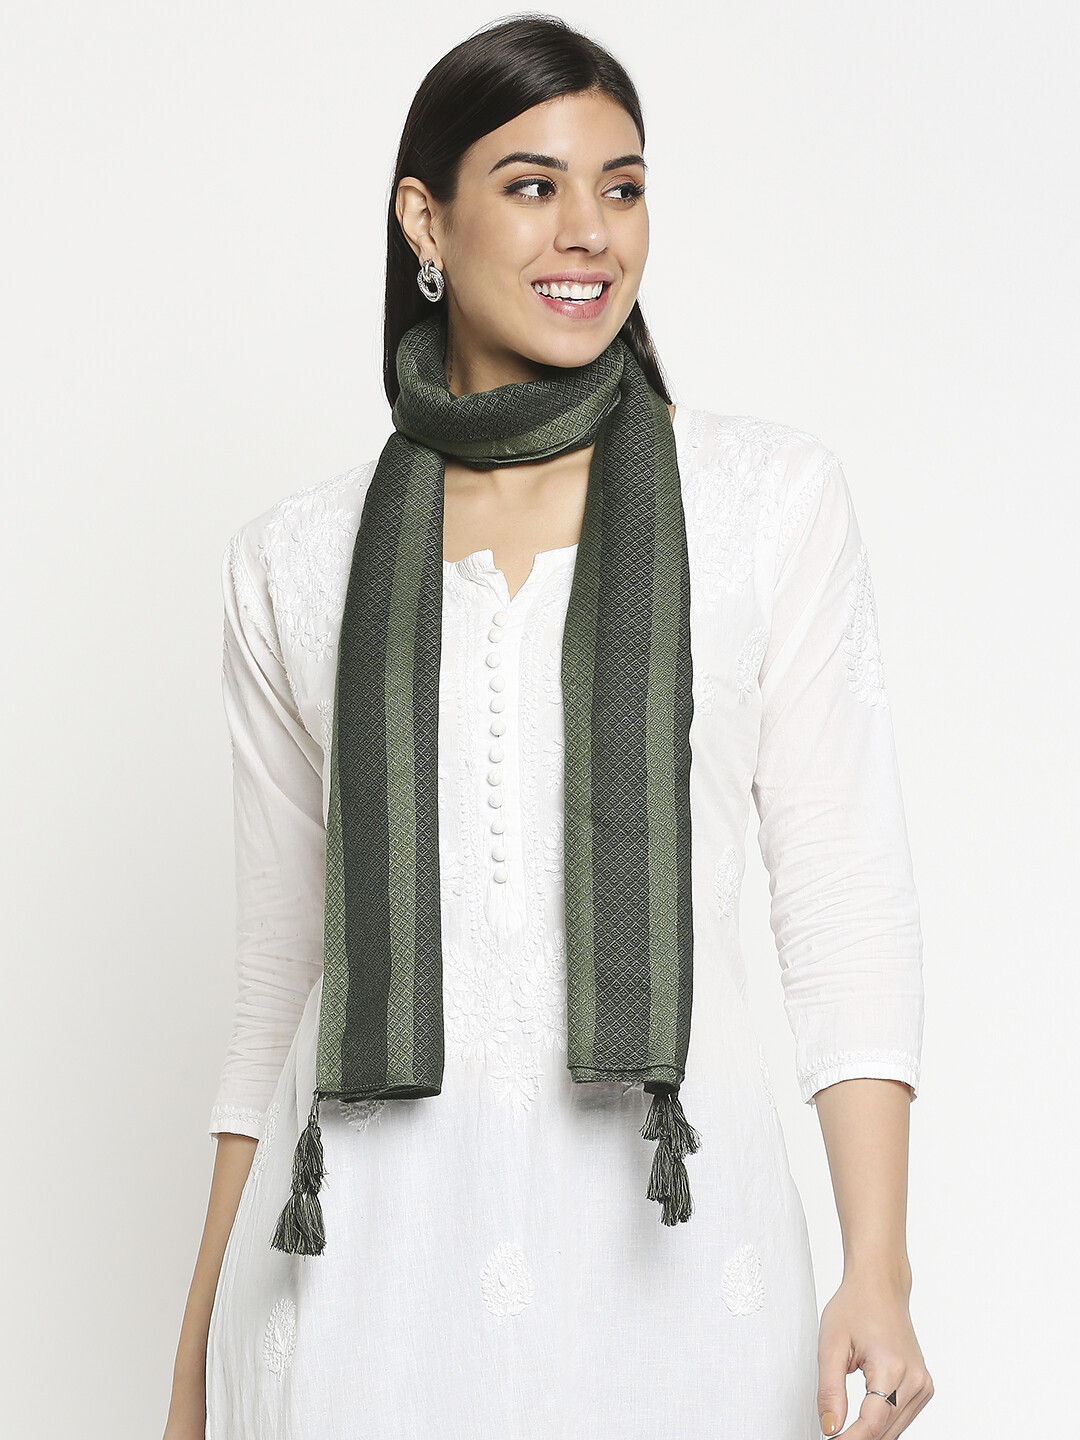 Dyed Dobby Design in Olive green Scarf with tassels